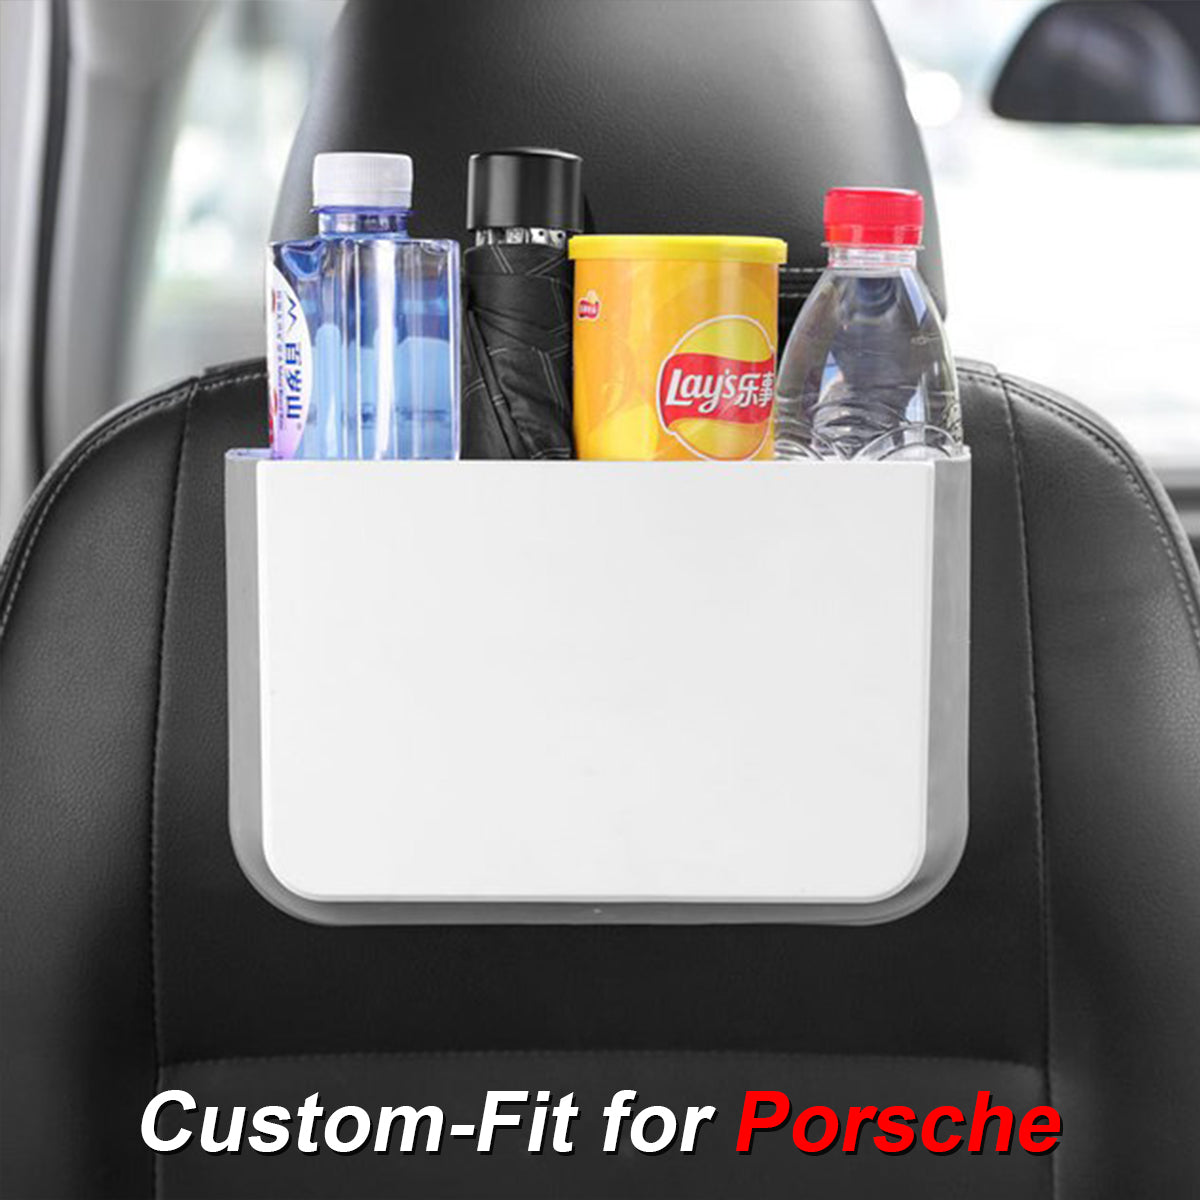 Hanging Waterproof Car Trash can-Foldable, Custom-Fit For Car, Waterproof, Equipped with Cup Holders and Trays DLRL251